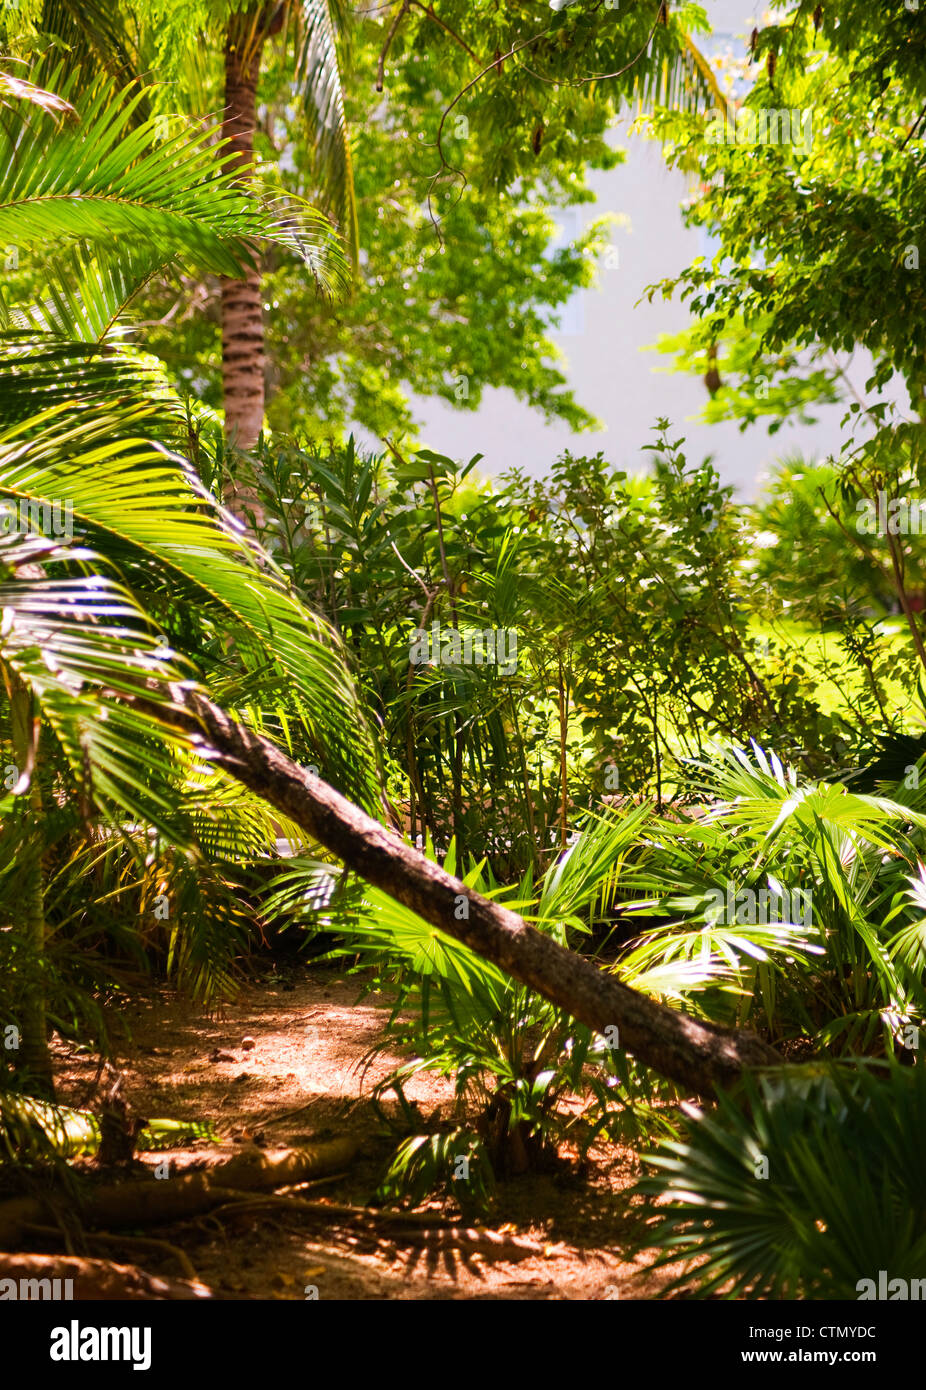 Tropical forest in Yucatan Peninsula, Mexico Stock Photo